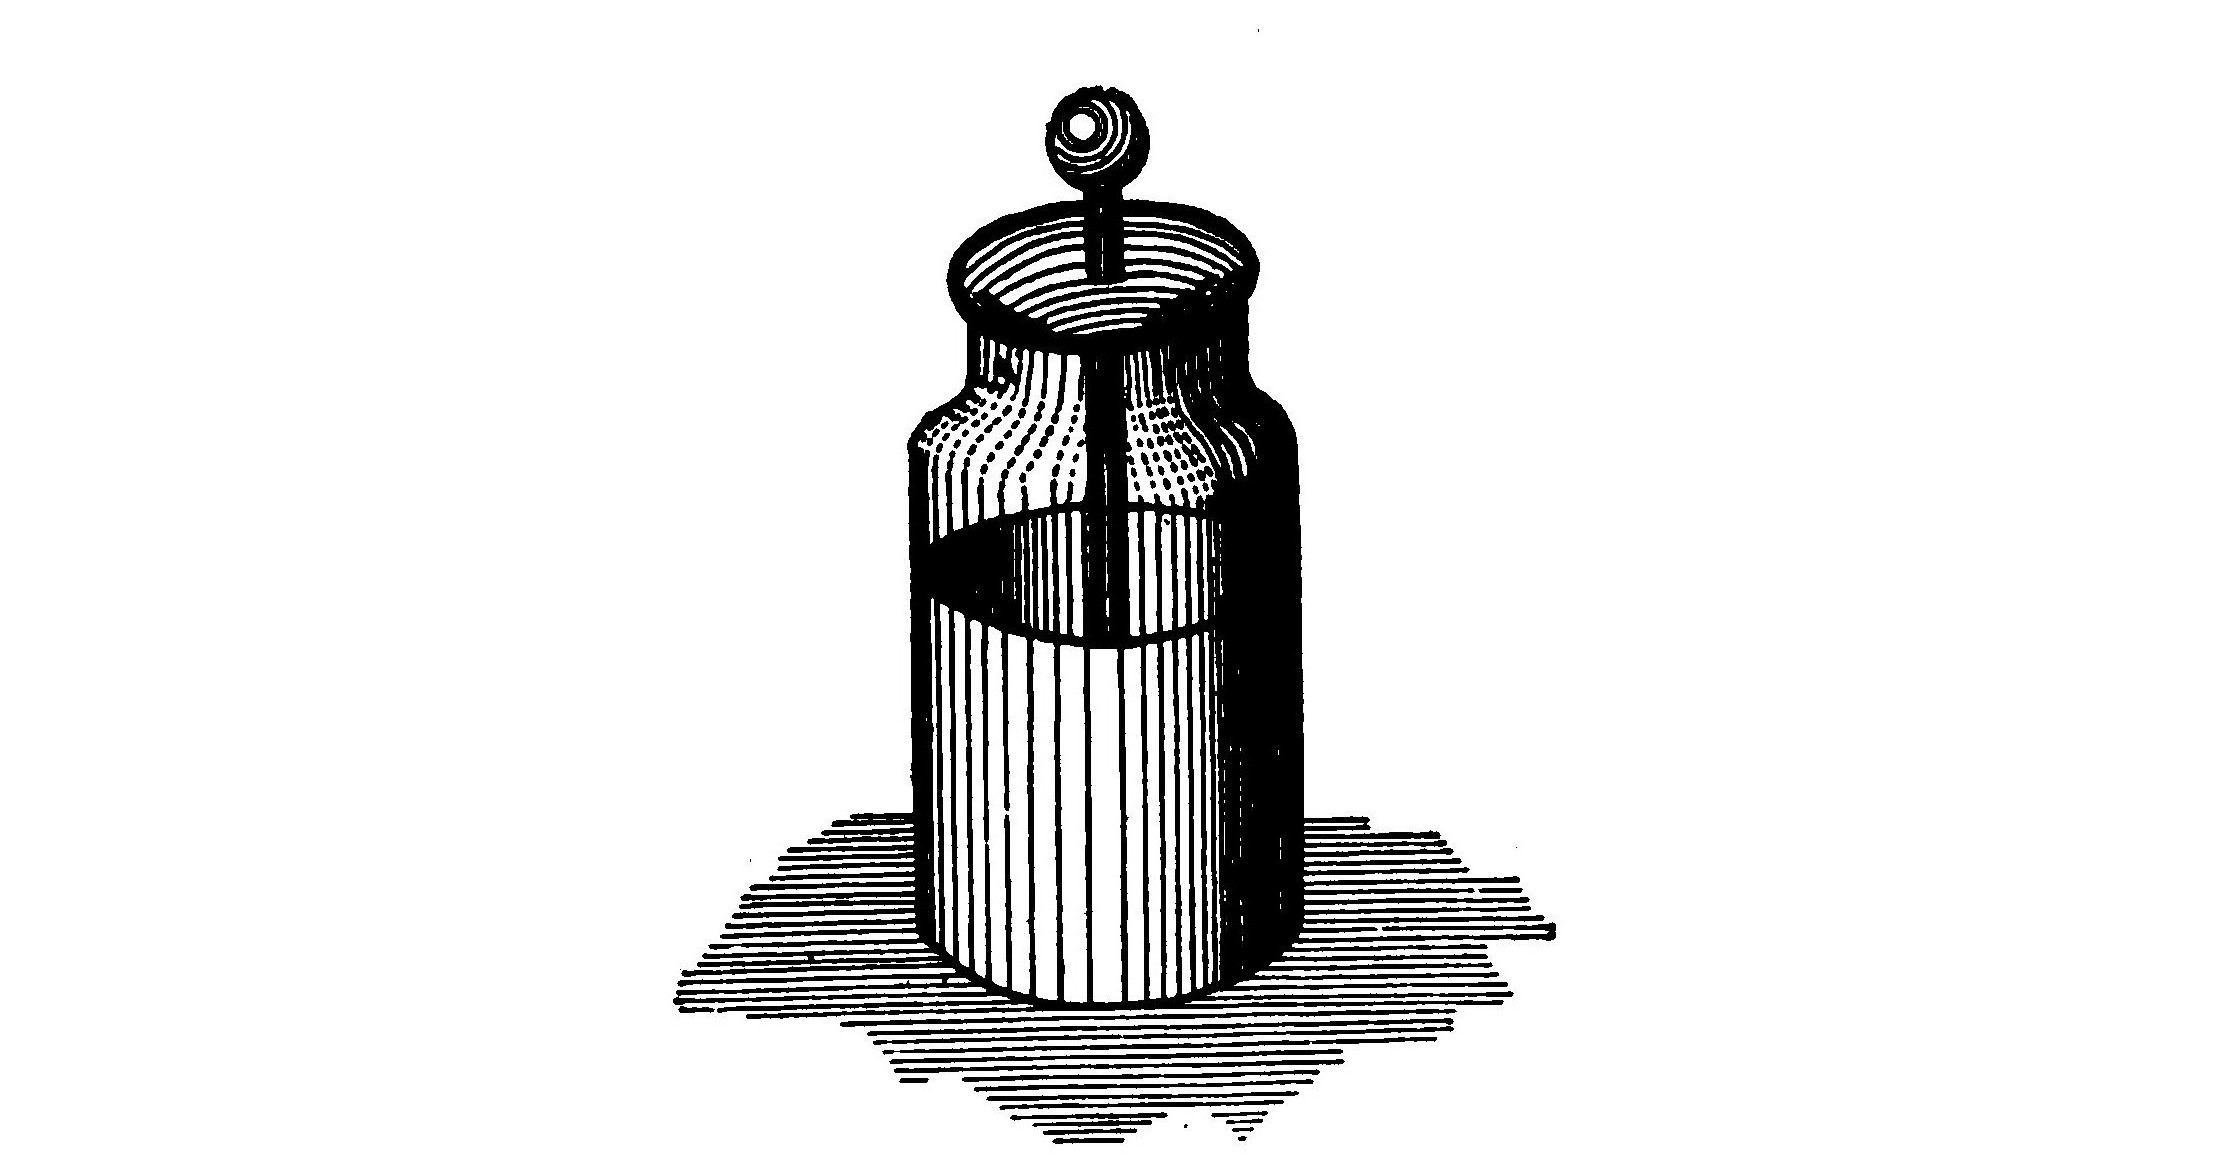 FIG. 2.—A Leyden jar is a glass jar lined inside and out with tinfoil for about two-thirds of its height.